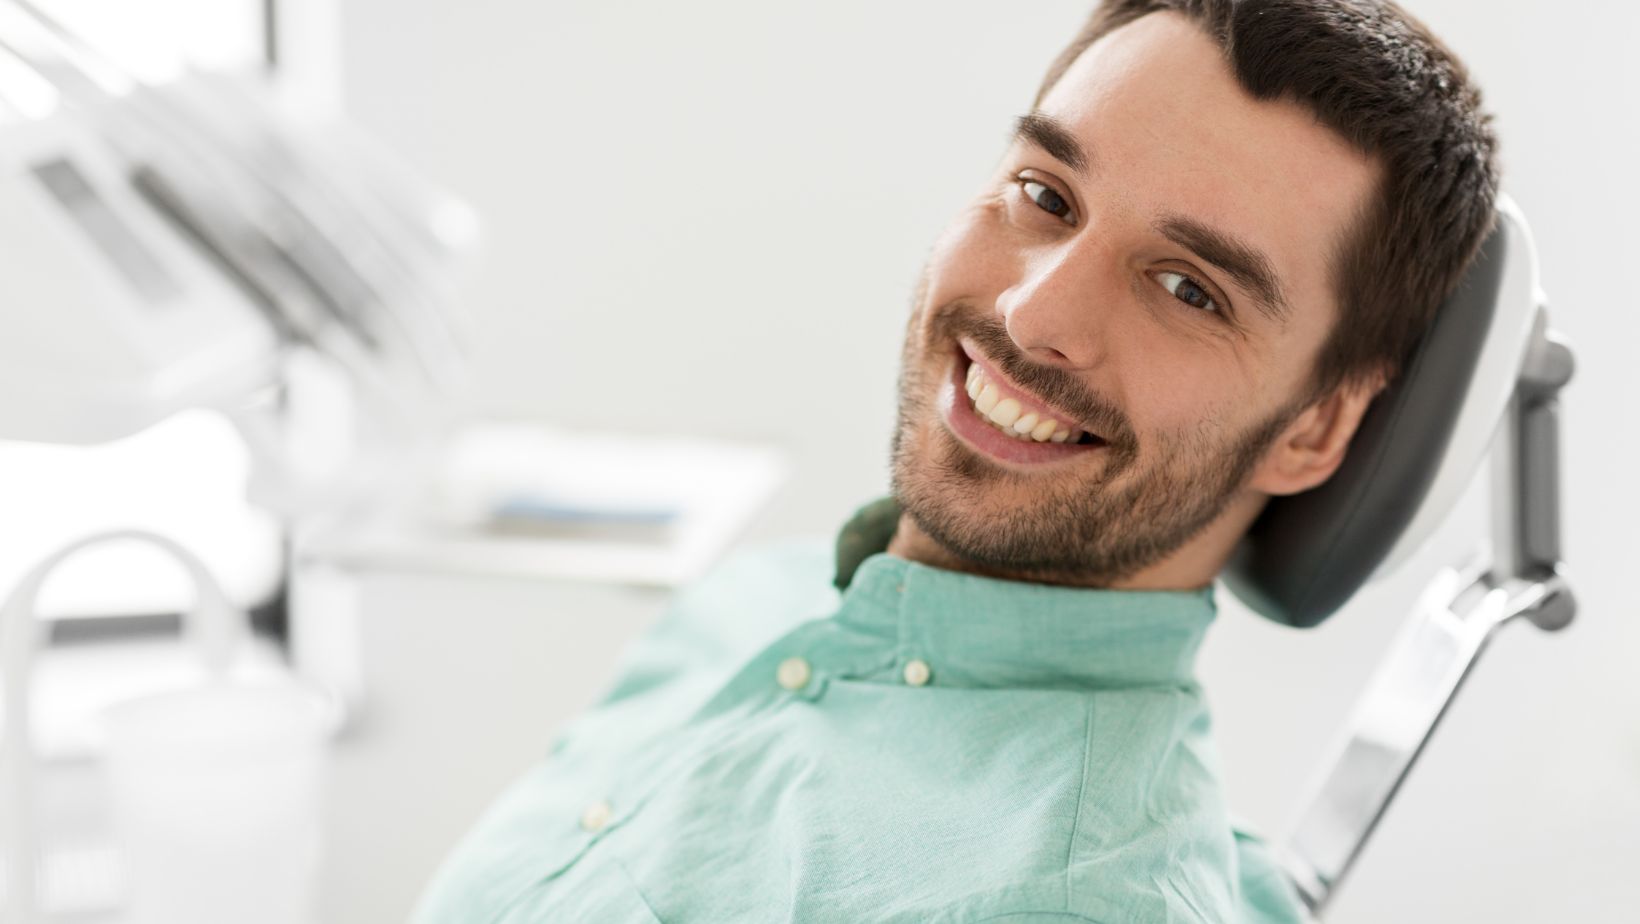 Cavities on Front Teeth: Why Do We Get Them? What Are Your Options?